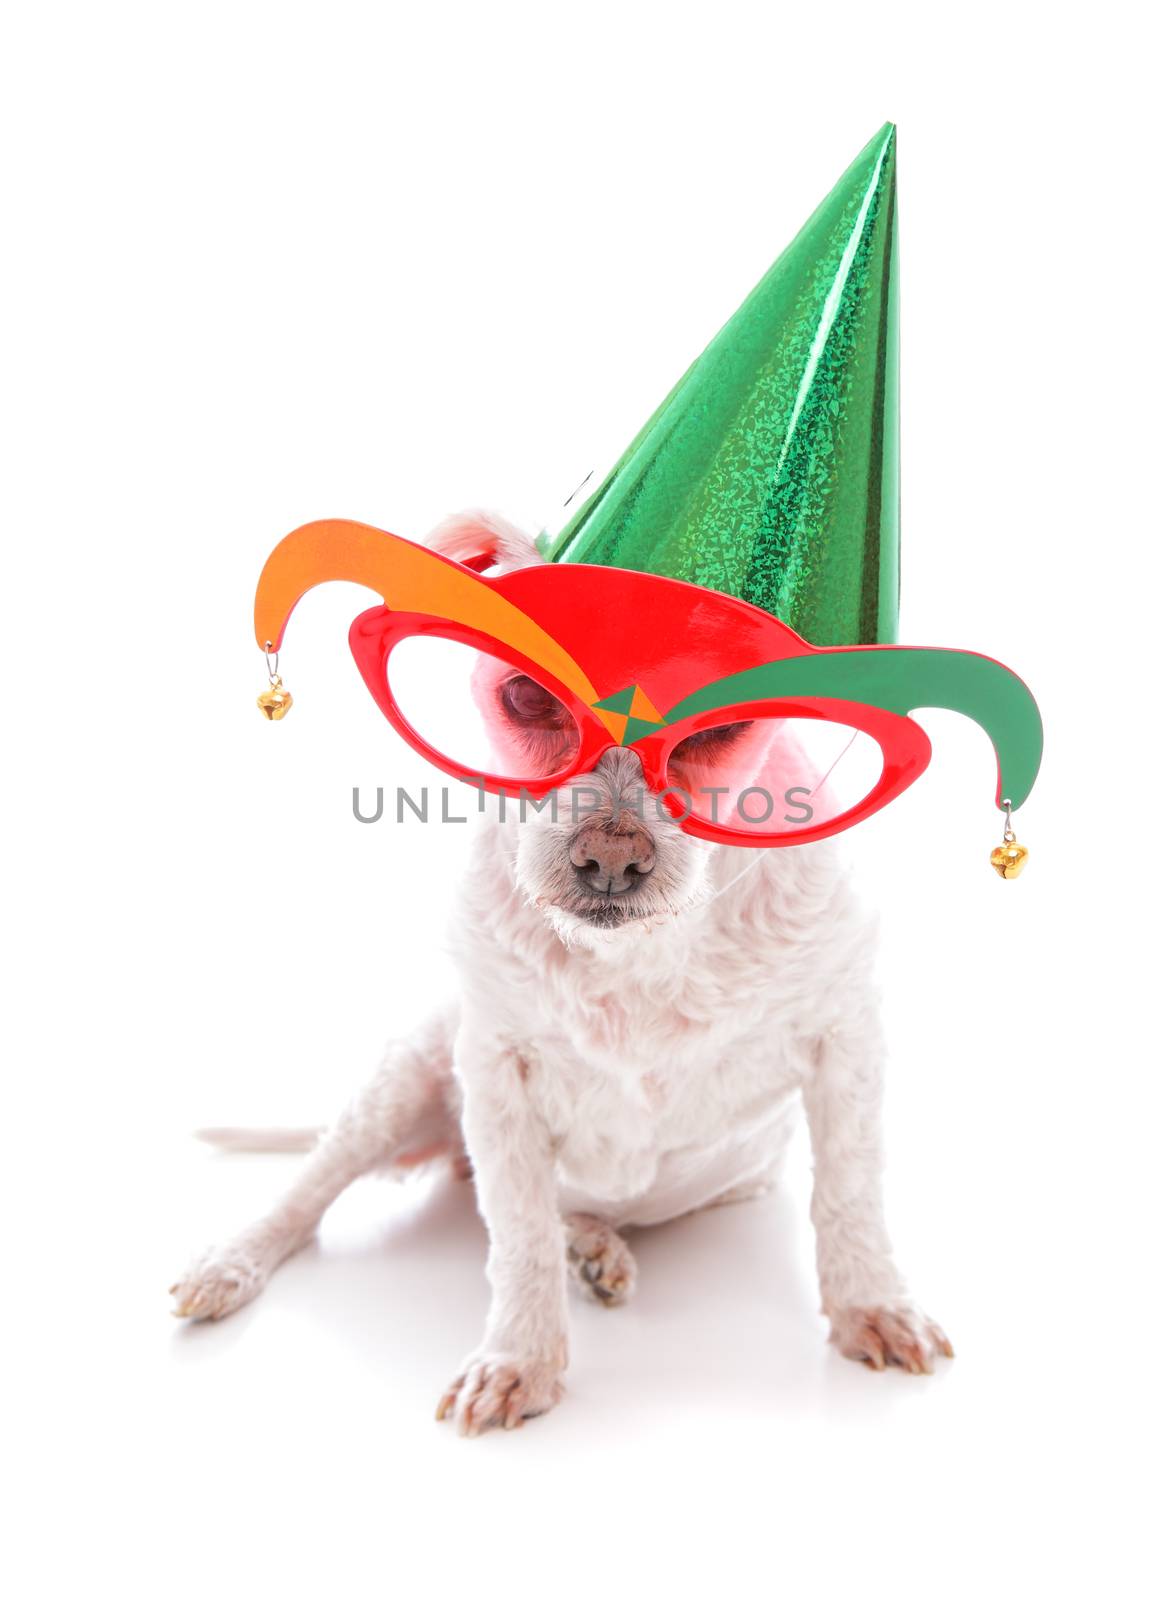 Pet wearing court jester glasses and wearing a party hat on a plain background.